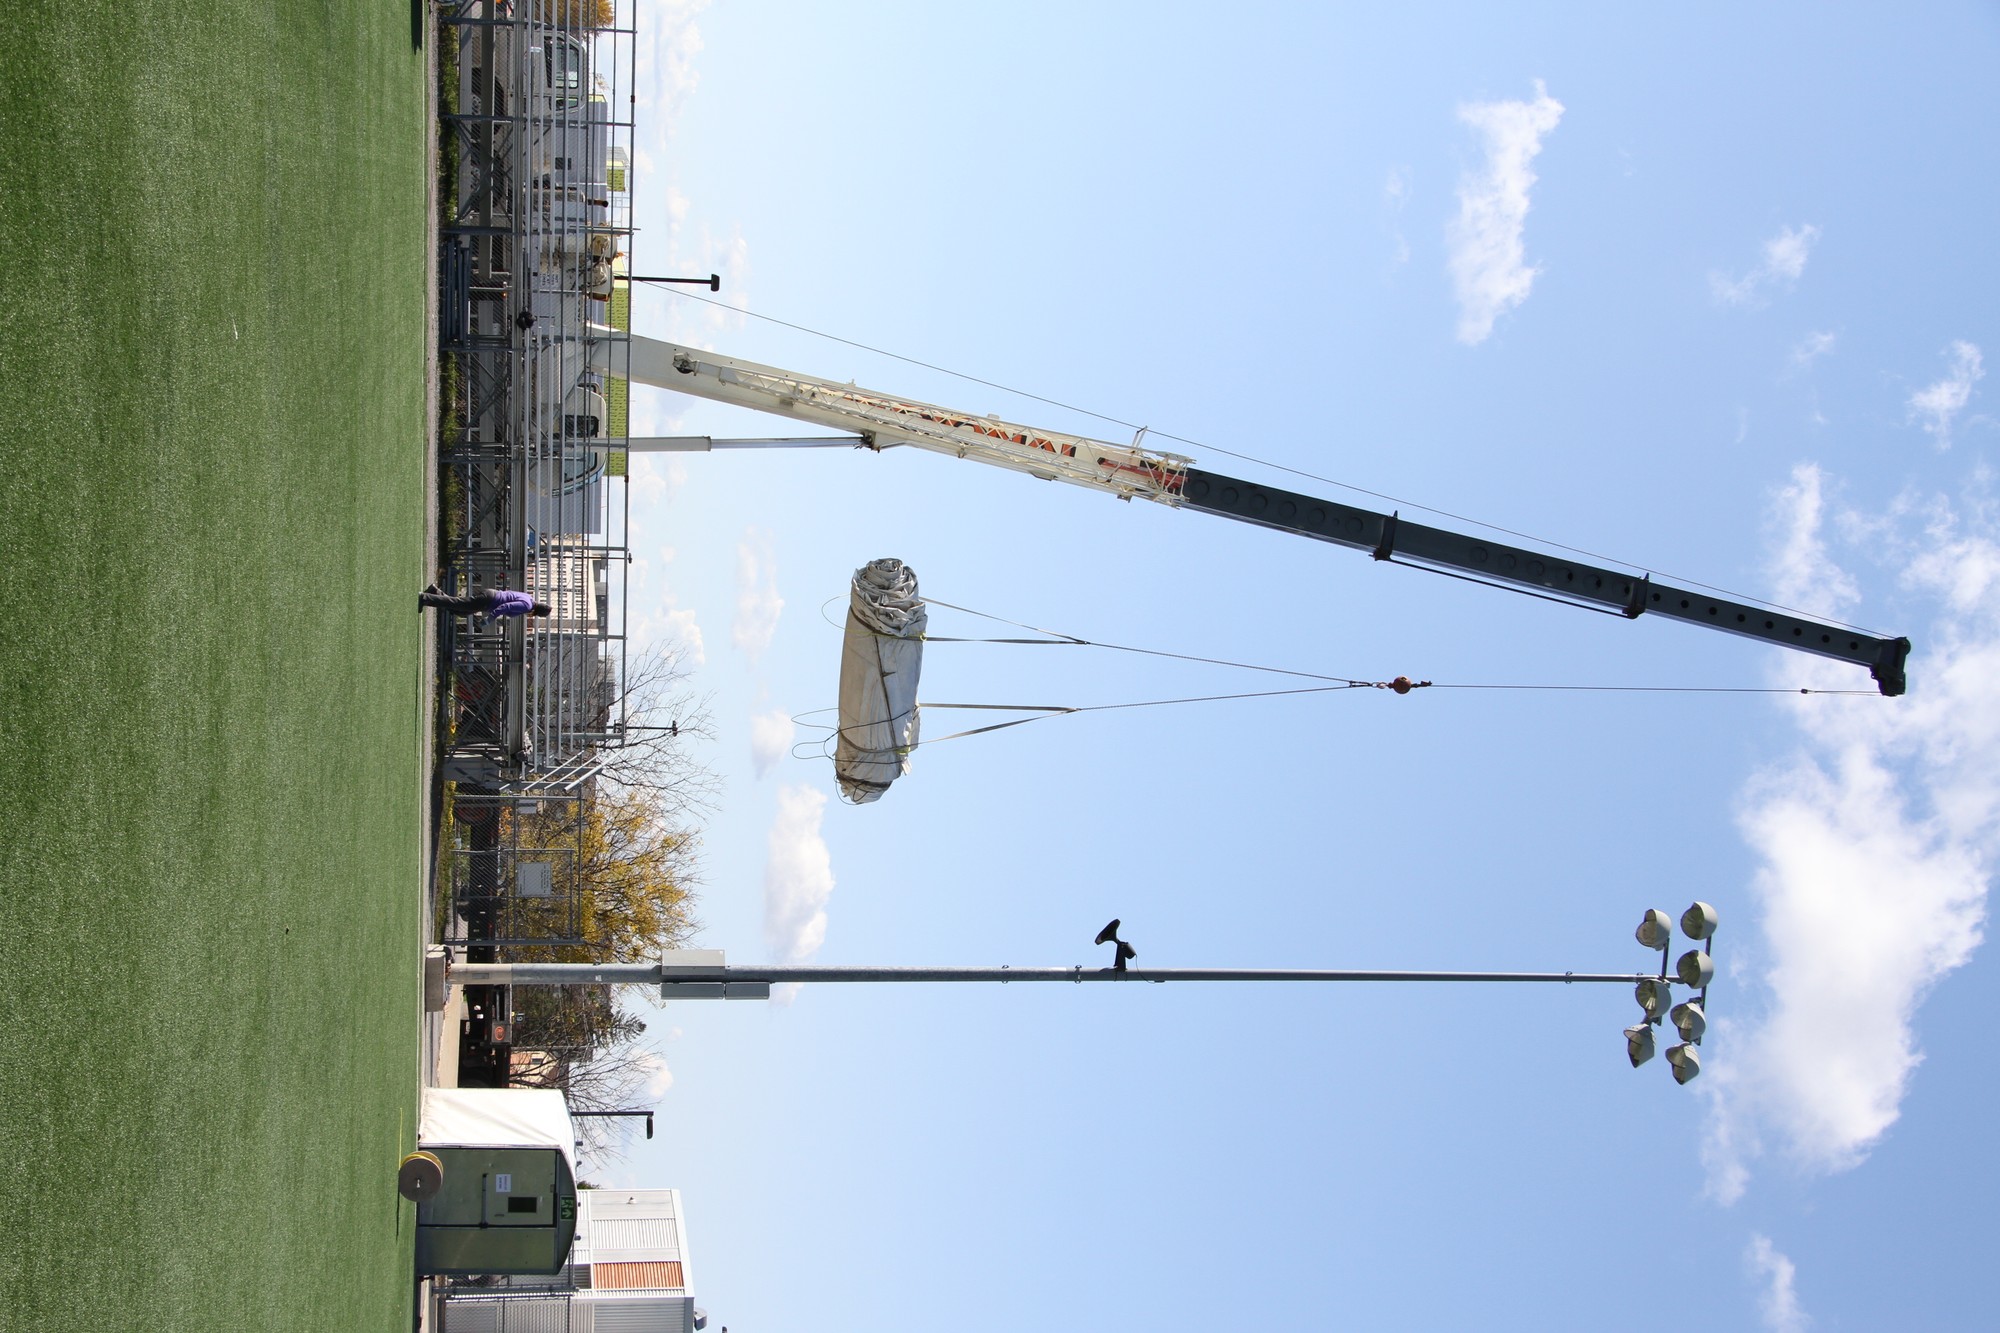 Martha Peak, senior manager of Athletics and Recreation, walks by as the crane lifts the largest tarp off the field.